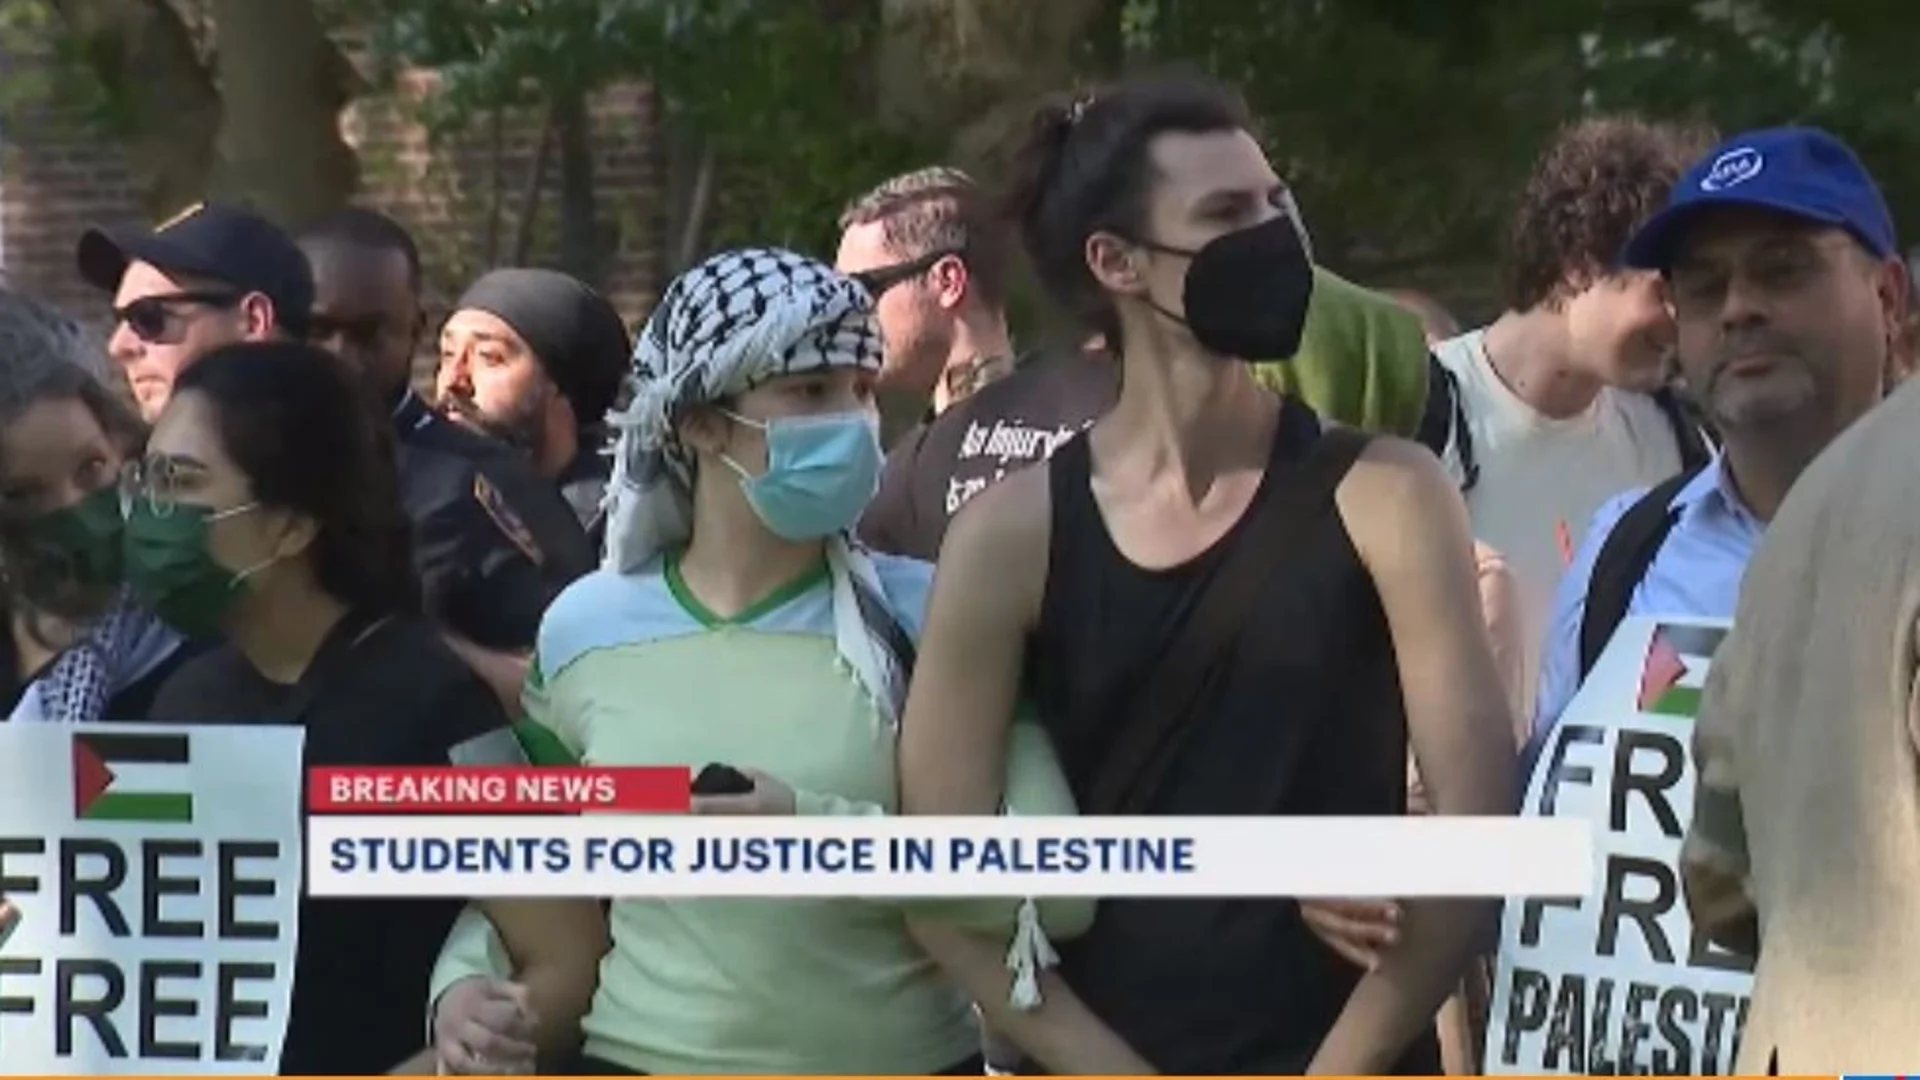 Pro-Palestinian protest that postponed final exams at Rutgers ends peacefully